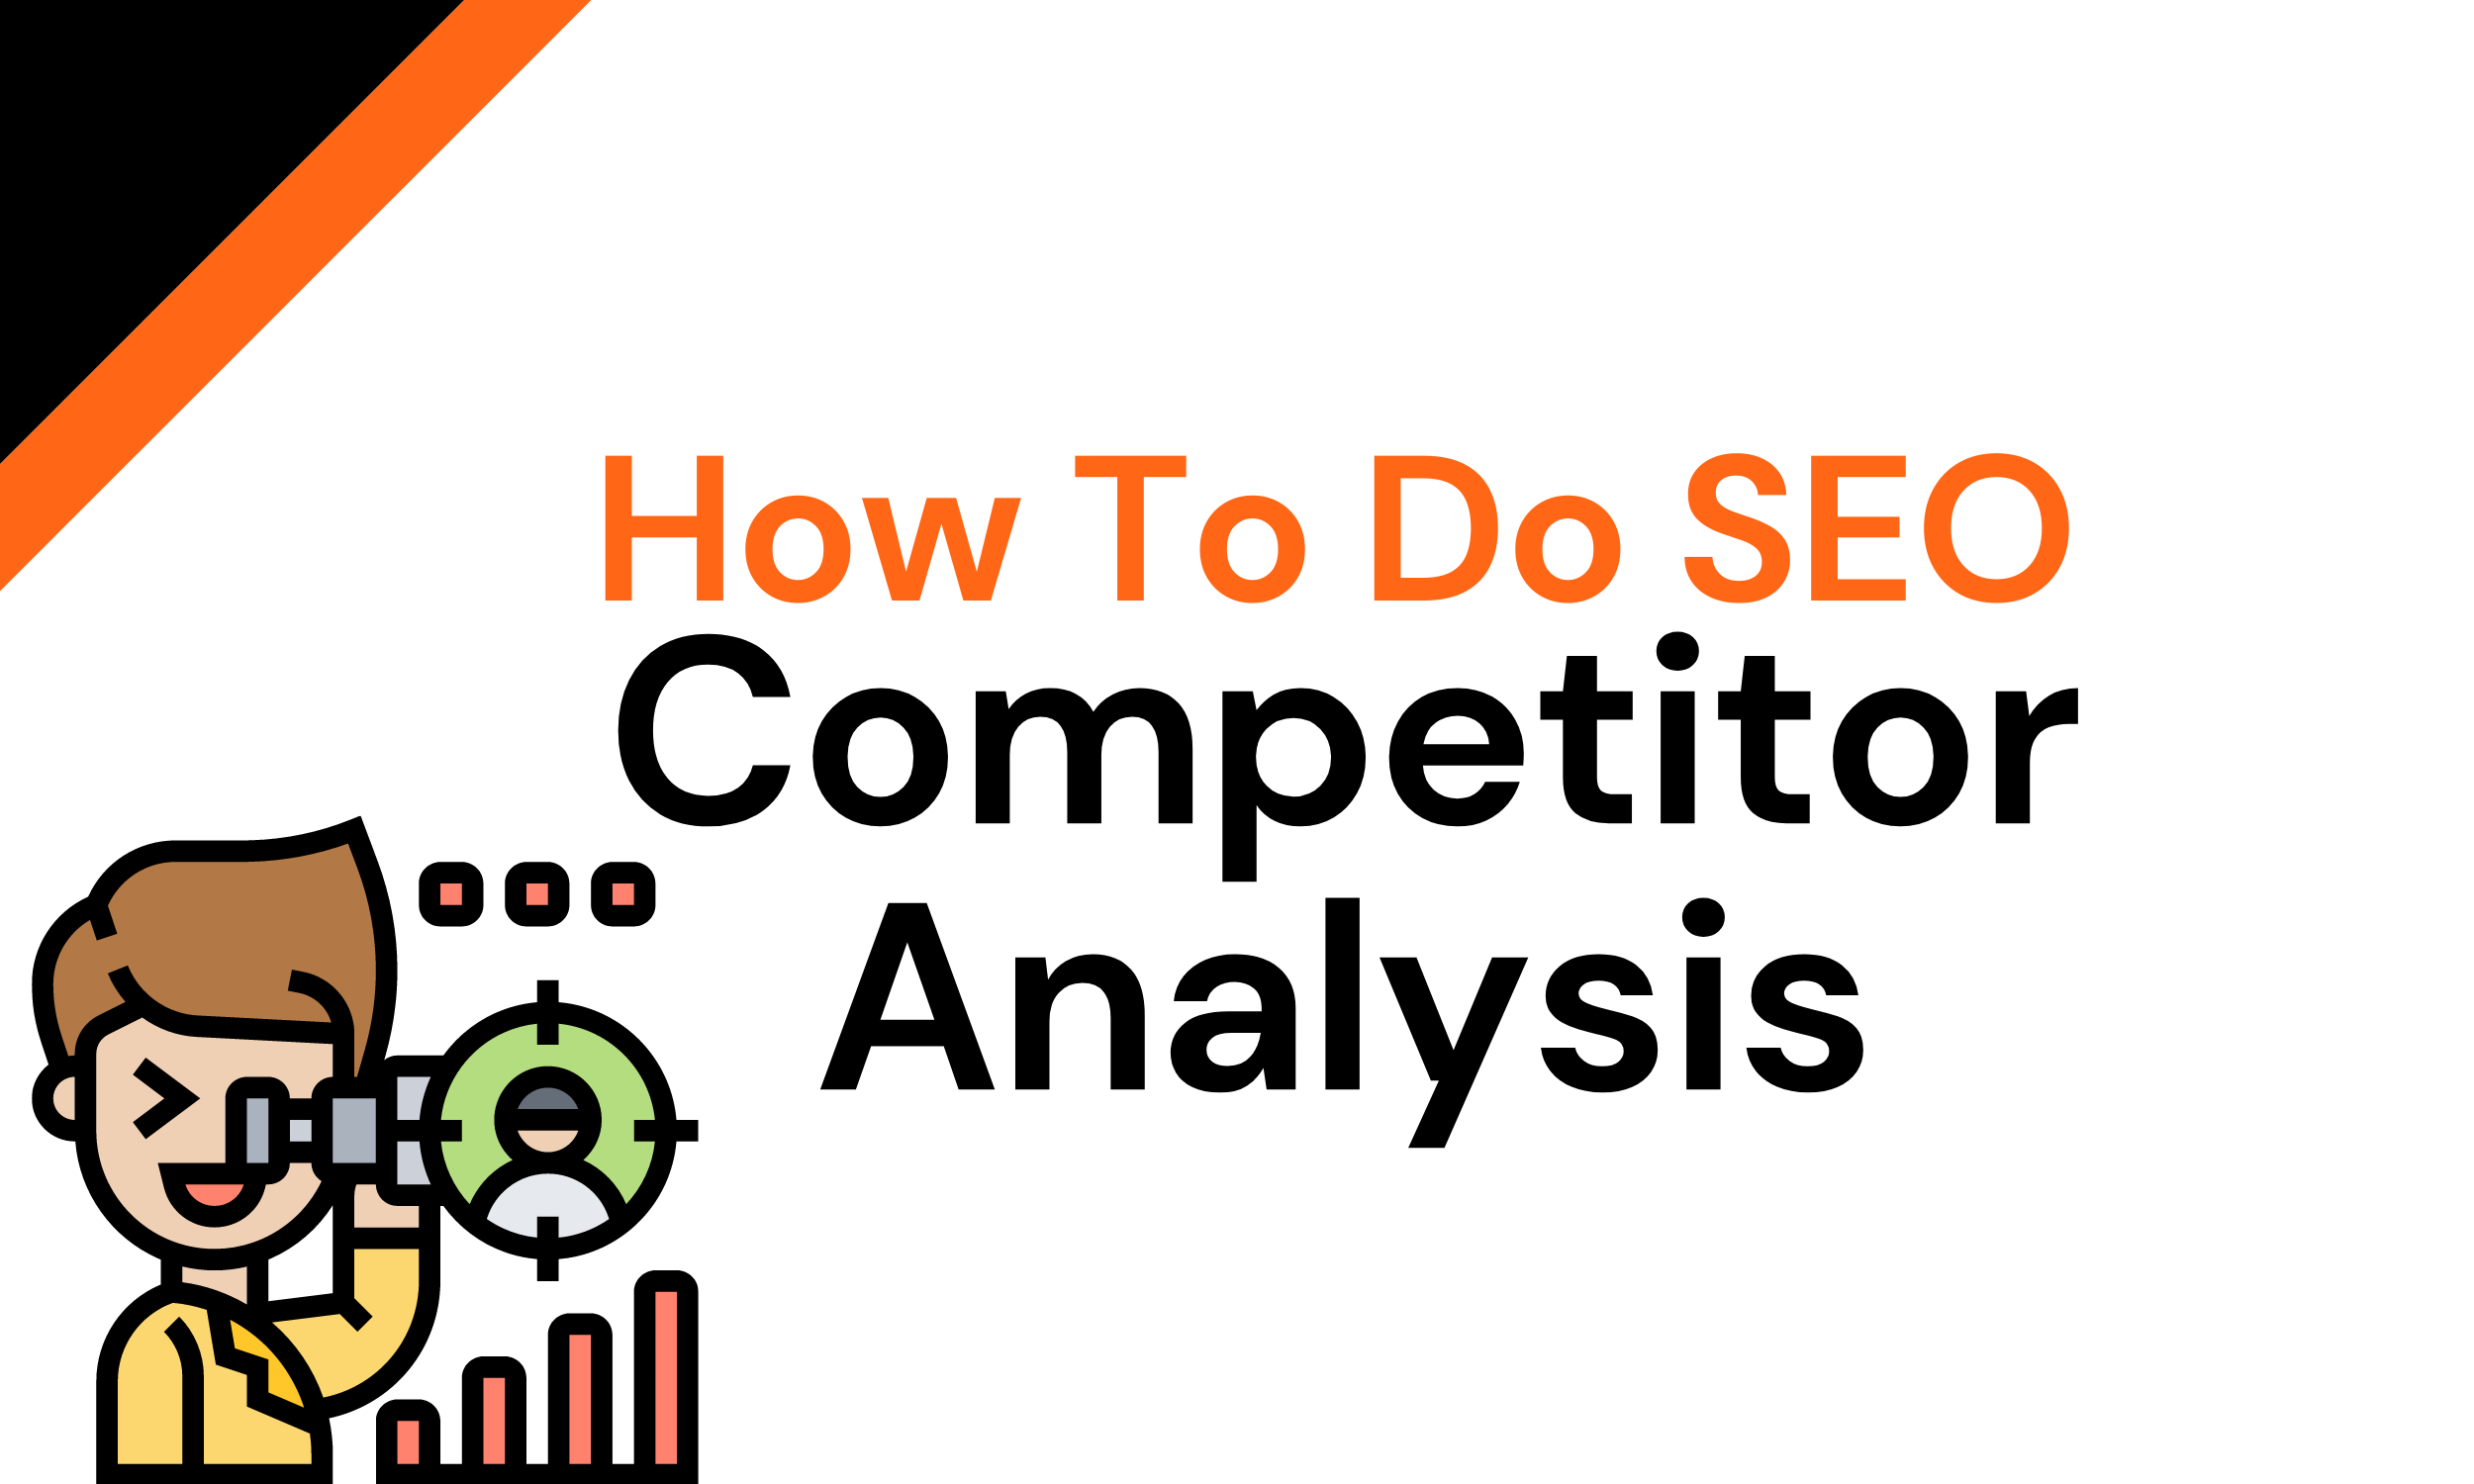 Easy Guide on How To Do SEO Competitor Analysis